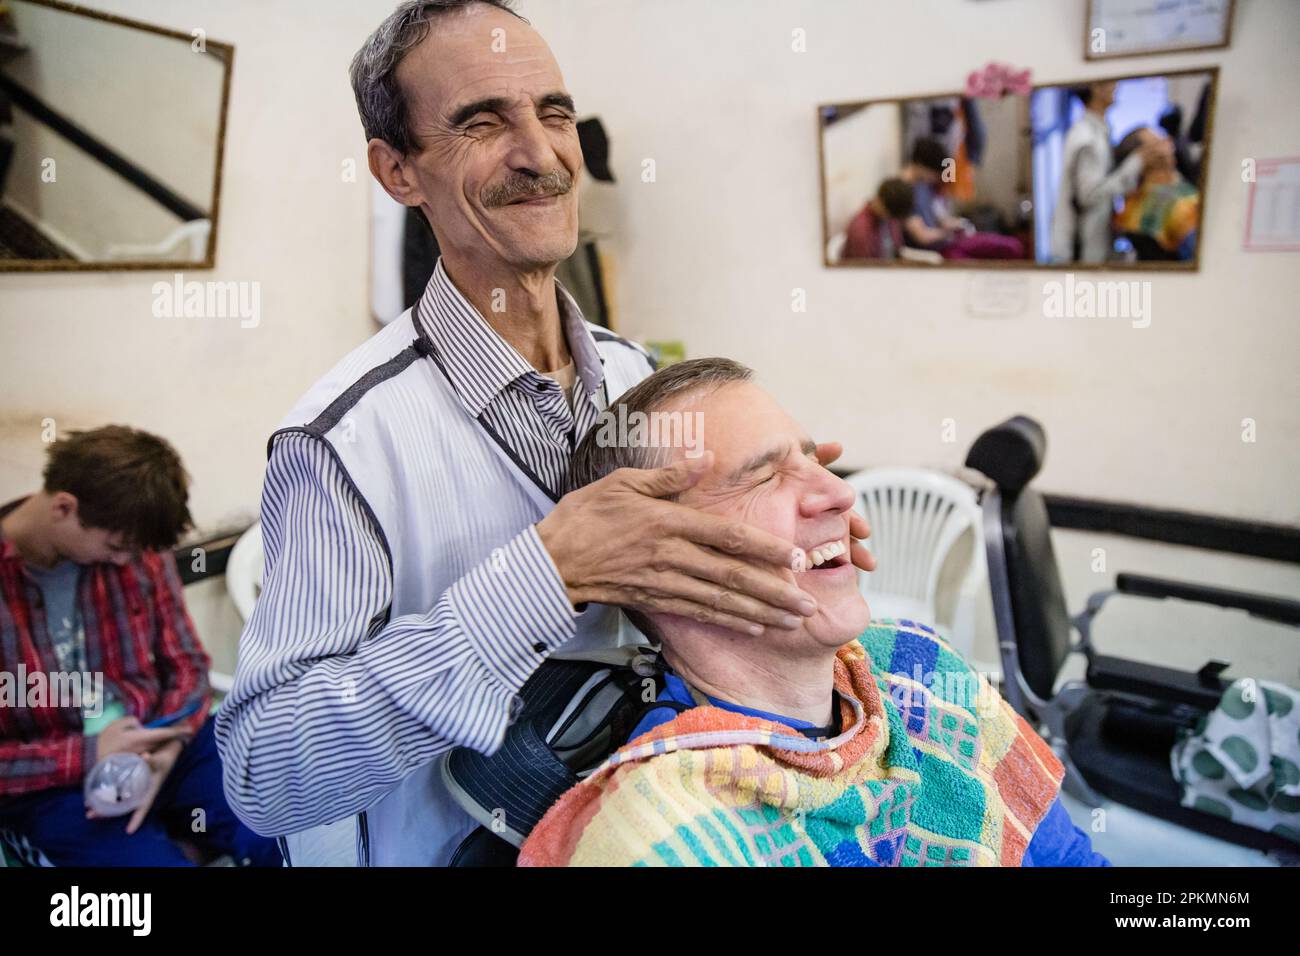 An American tourist getting a straight razor shave and a haircut in a barbershop in Marrakech Morocco Stock Photo